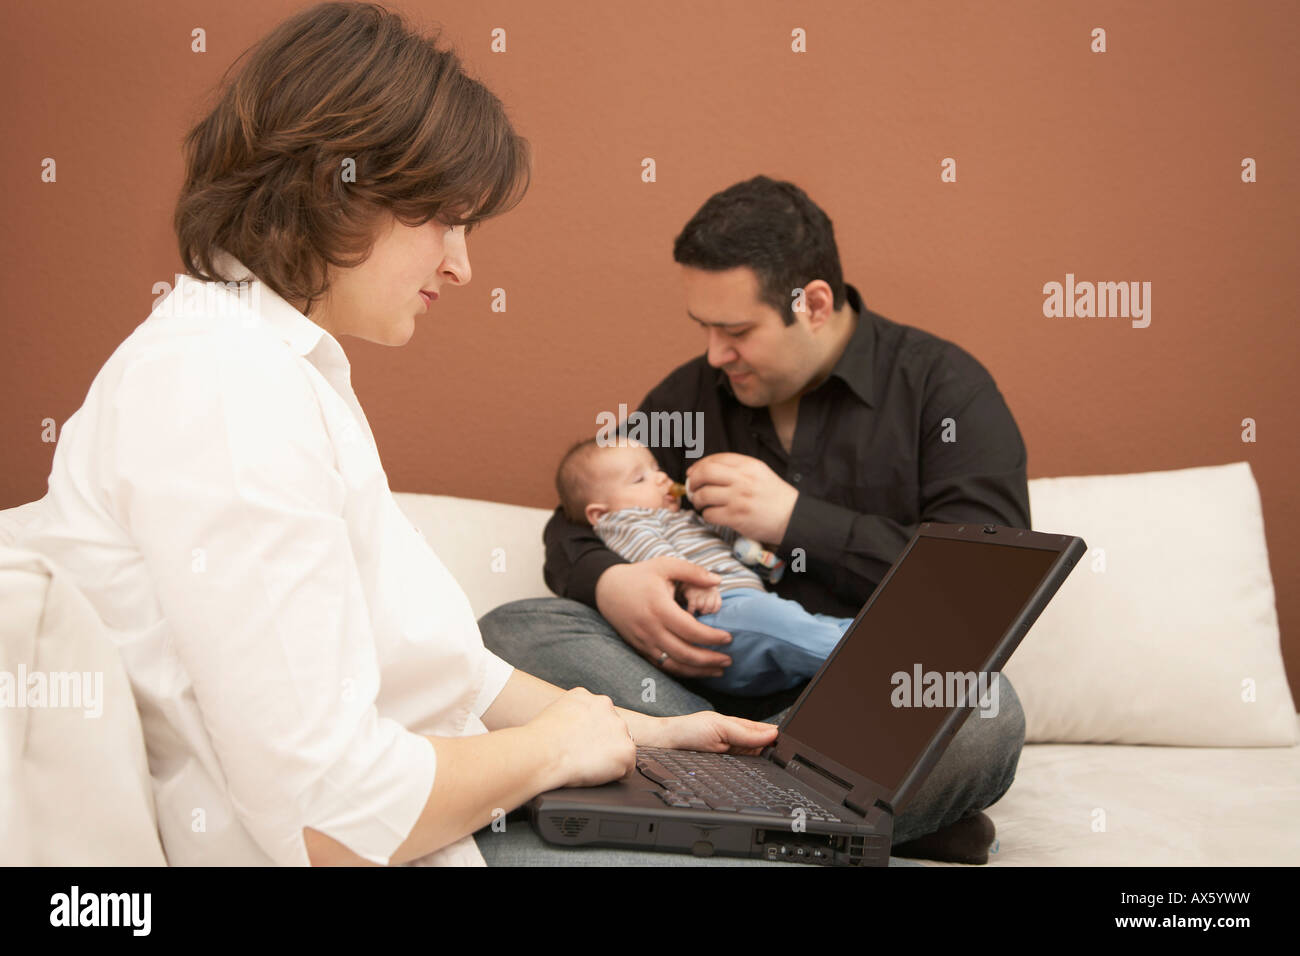 Young woman working on laptop while her husband cares for their baby Stock Photo